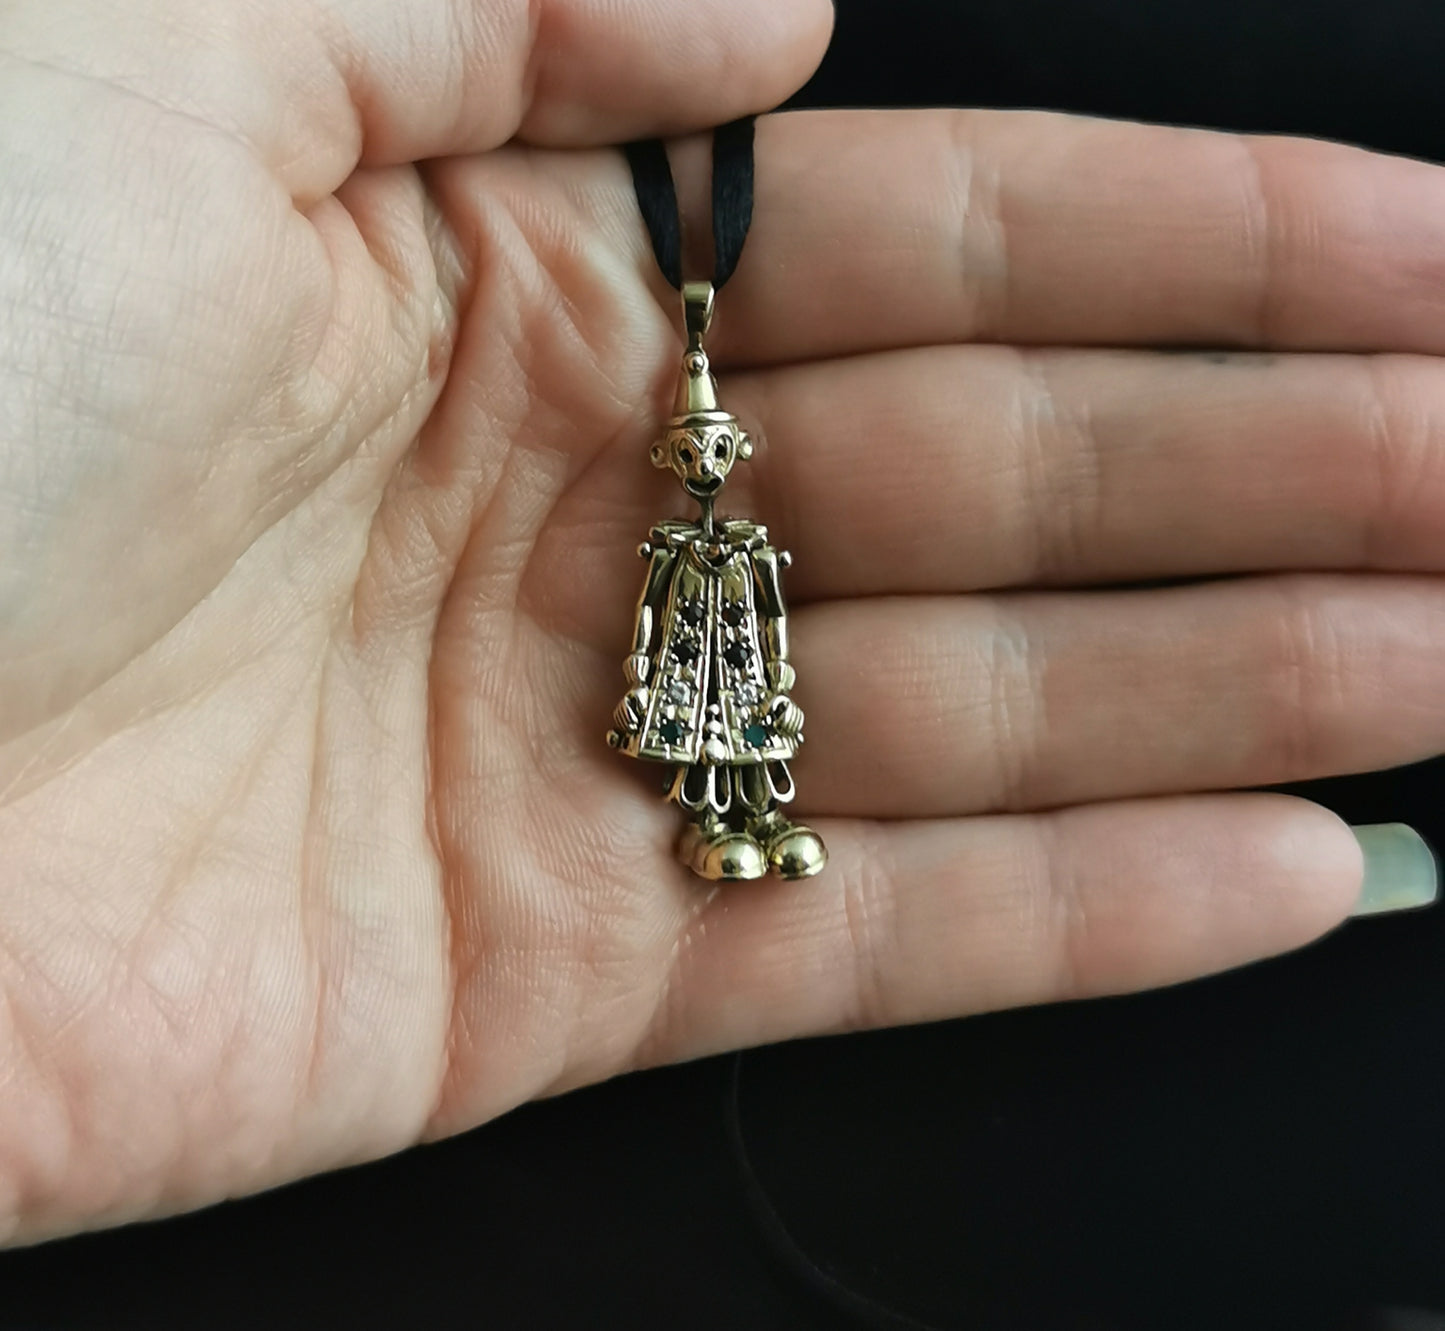 Vintage 9k yellow gold clown pendant, Articulated, Gemstone, 1990s